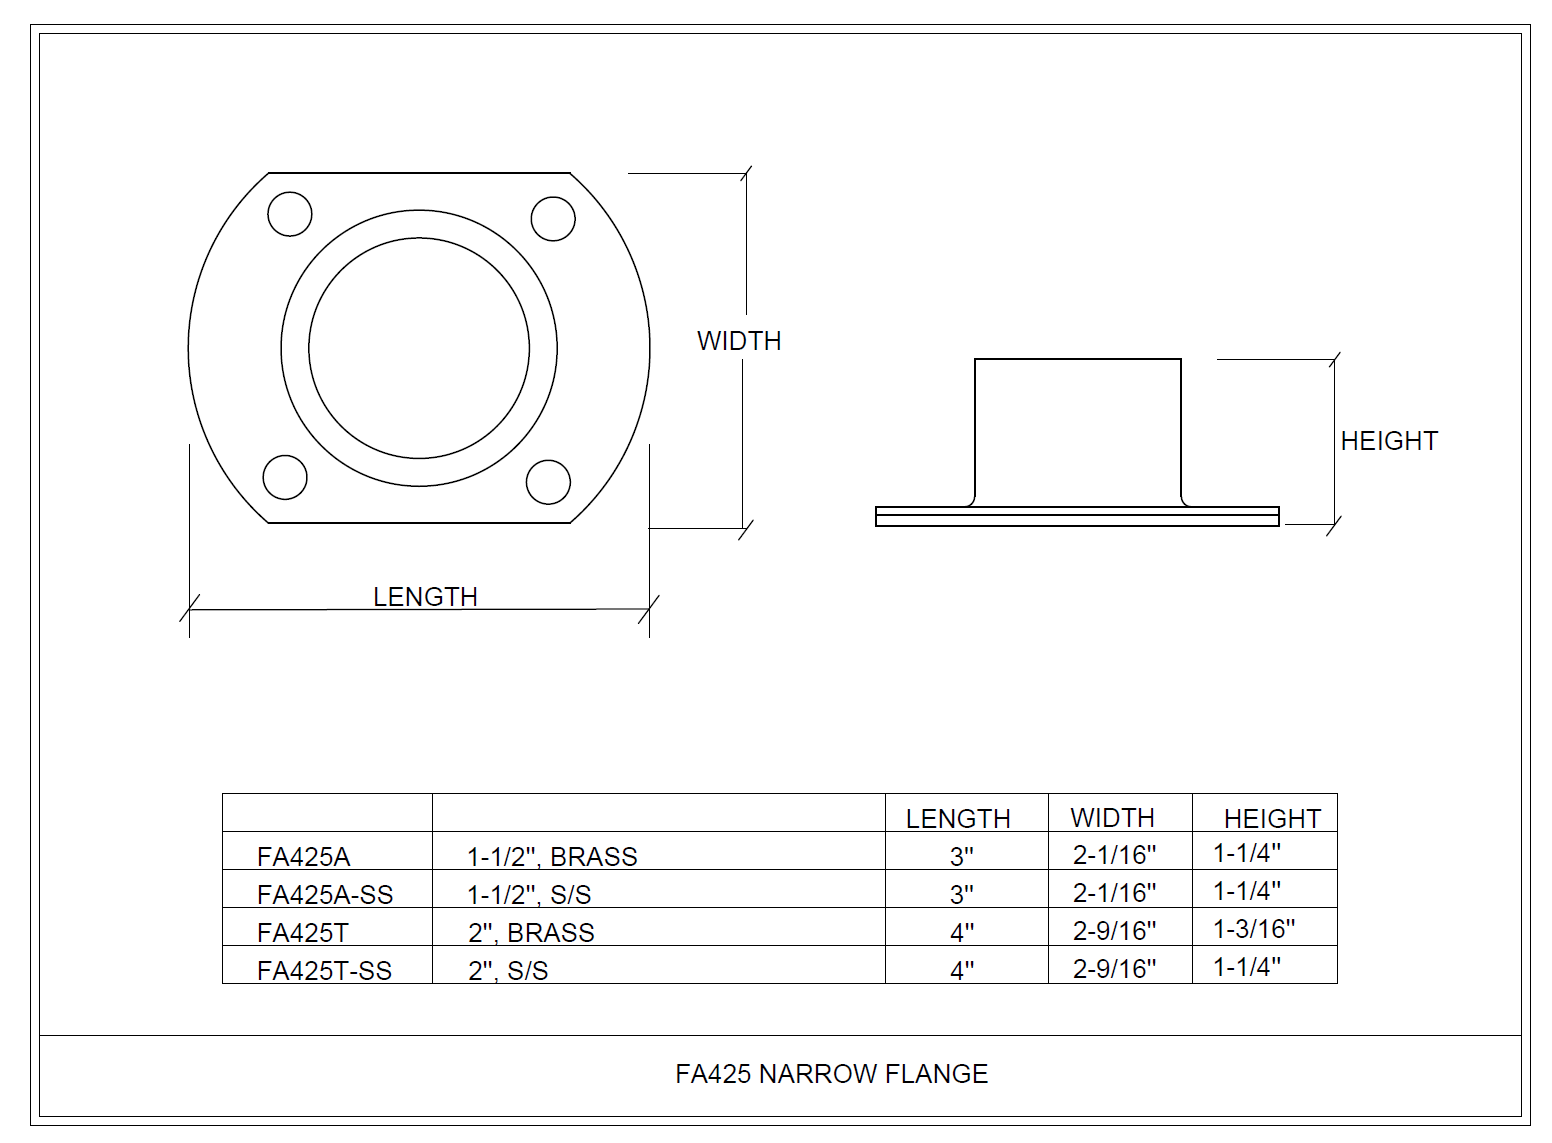 Narrow Cut Flange 1.5" - All finishes